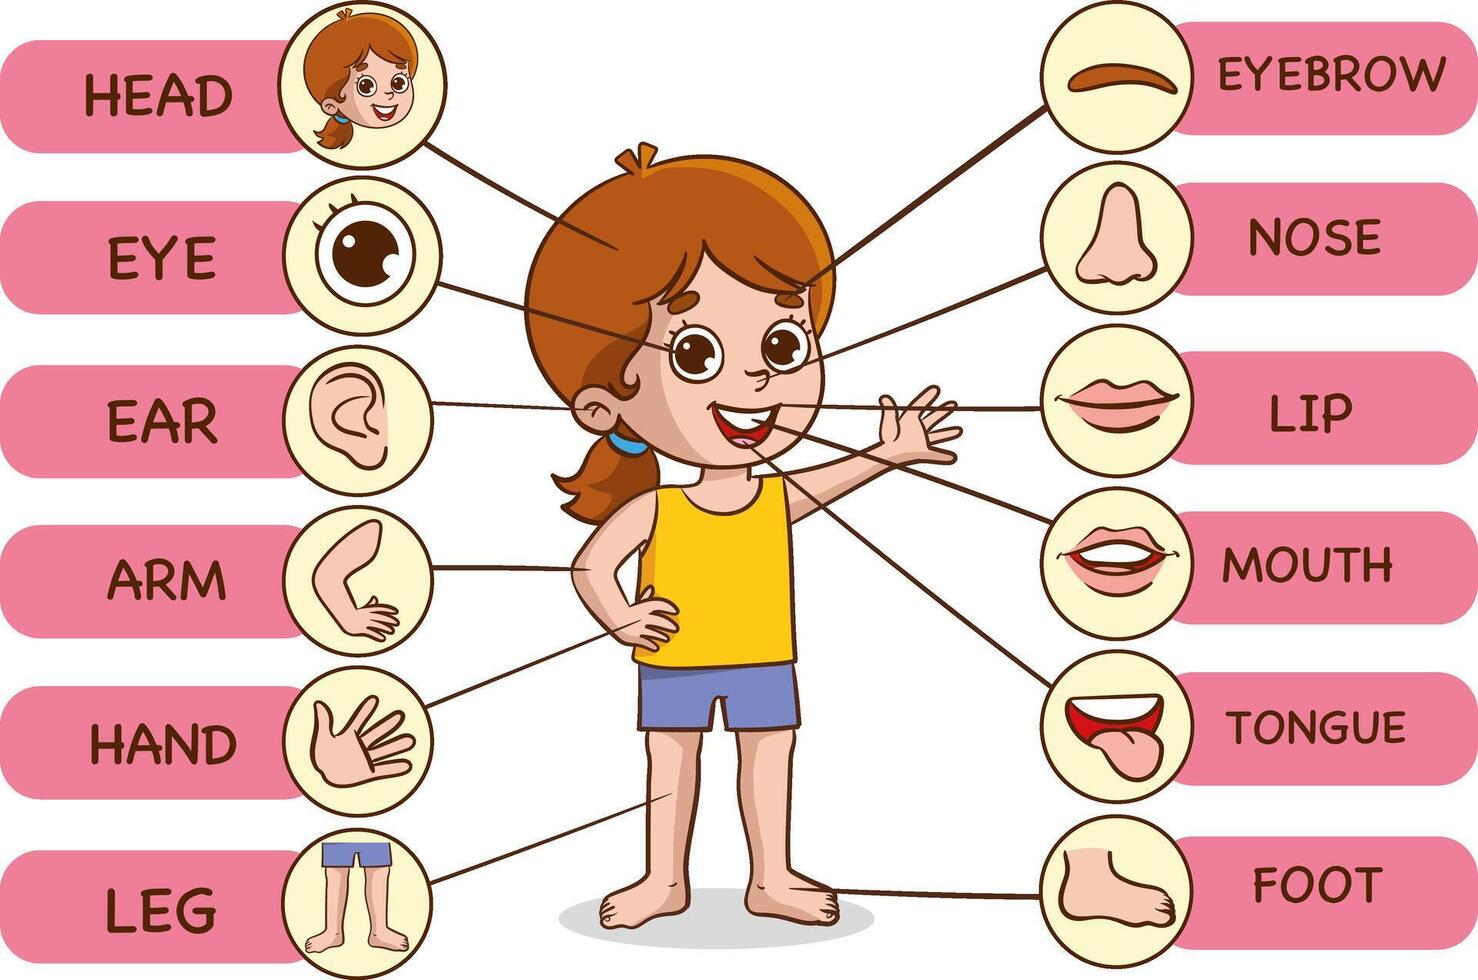 Vector Illustration of Human Body.Preschool education poster with young boy anatomy